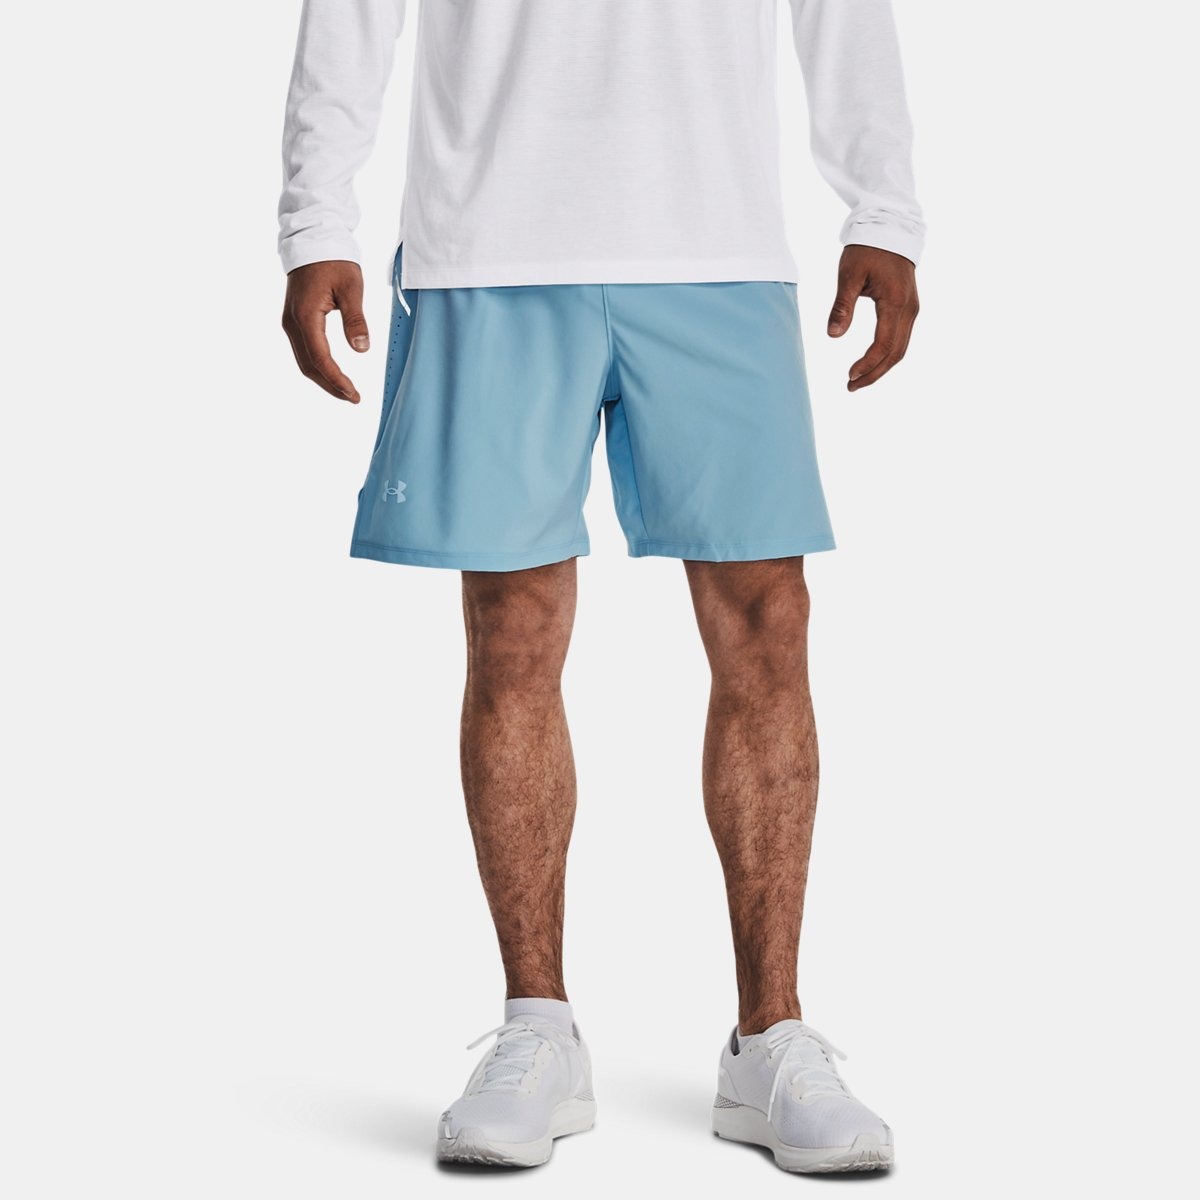 Blue Shorts for Man from Under Armour GOOFASH